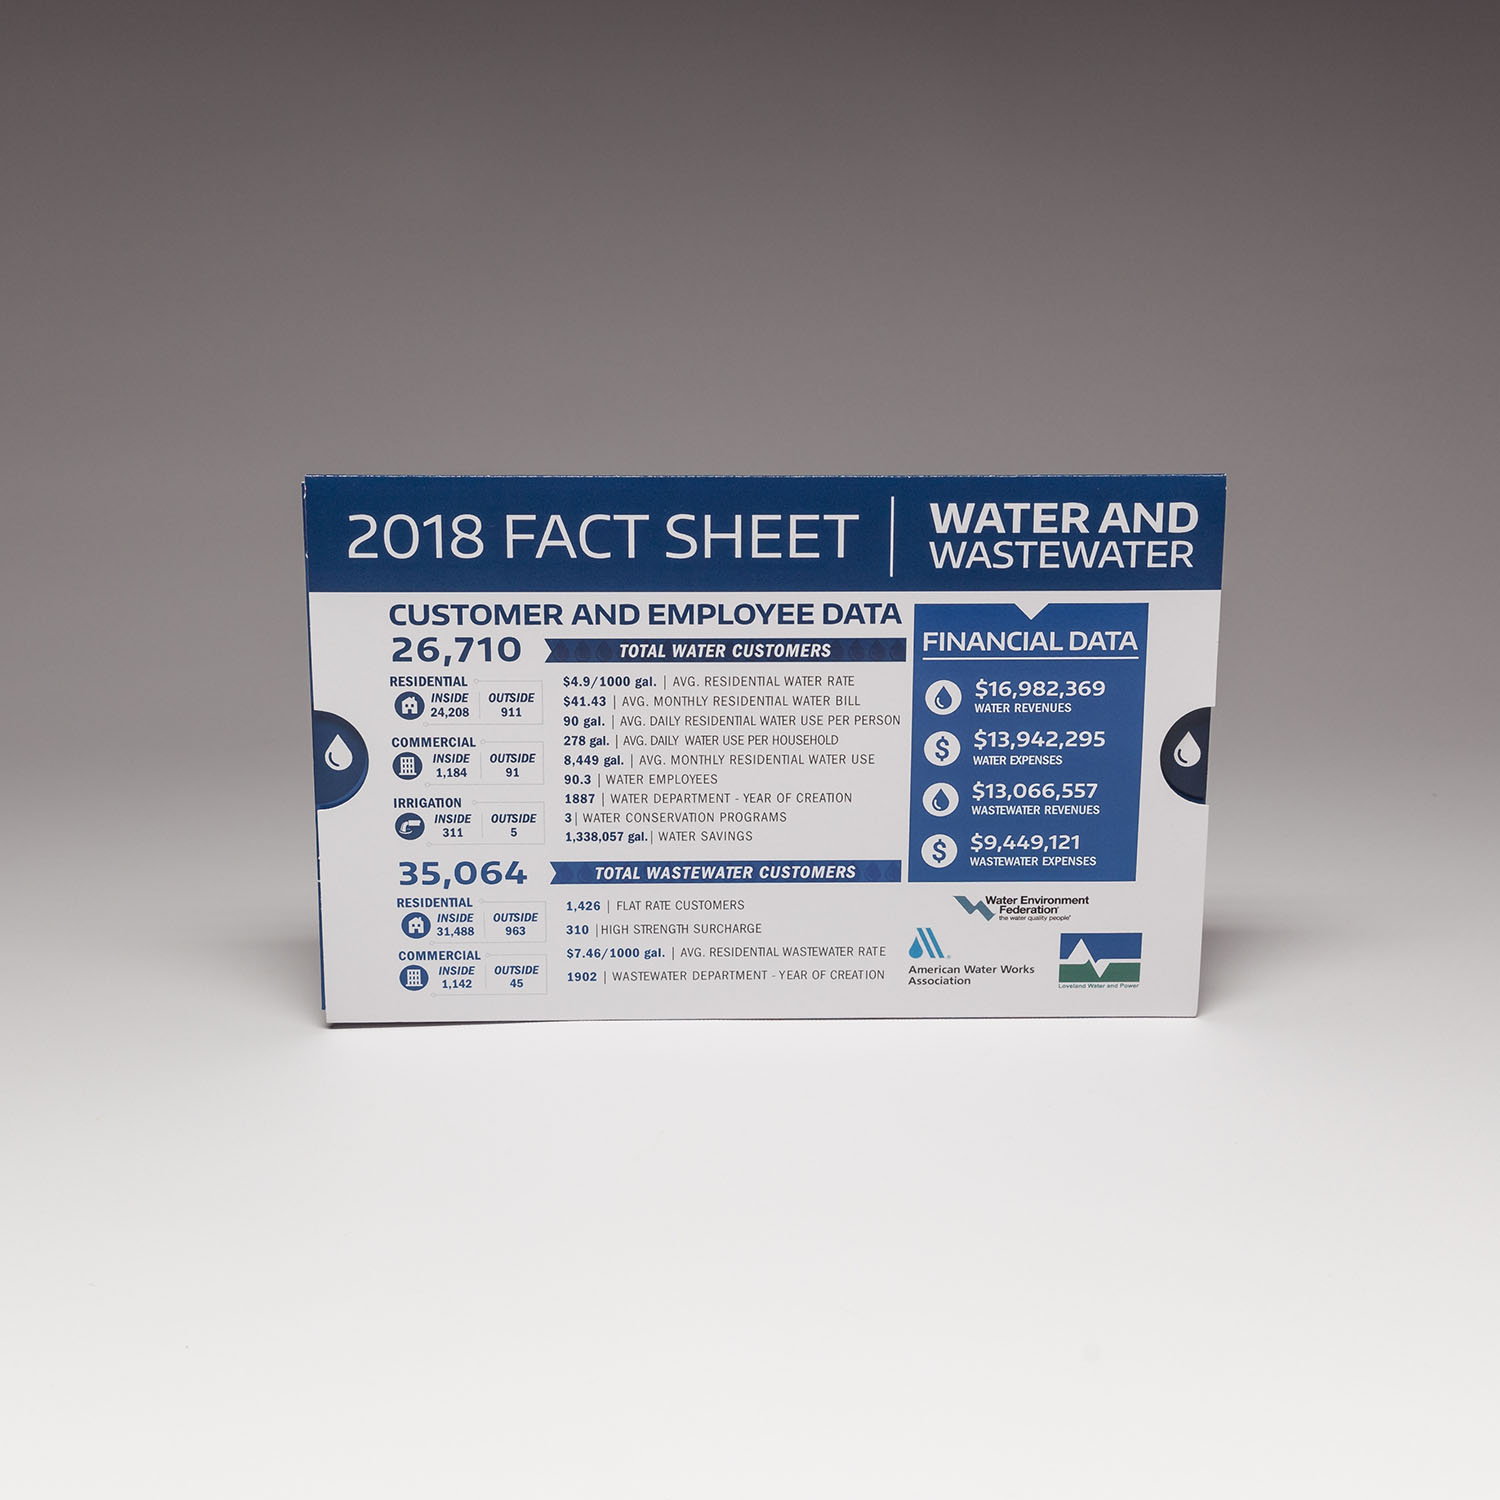 Our large extendo is an easy way to display a large amount of information in a very engaging way